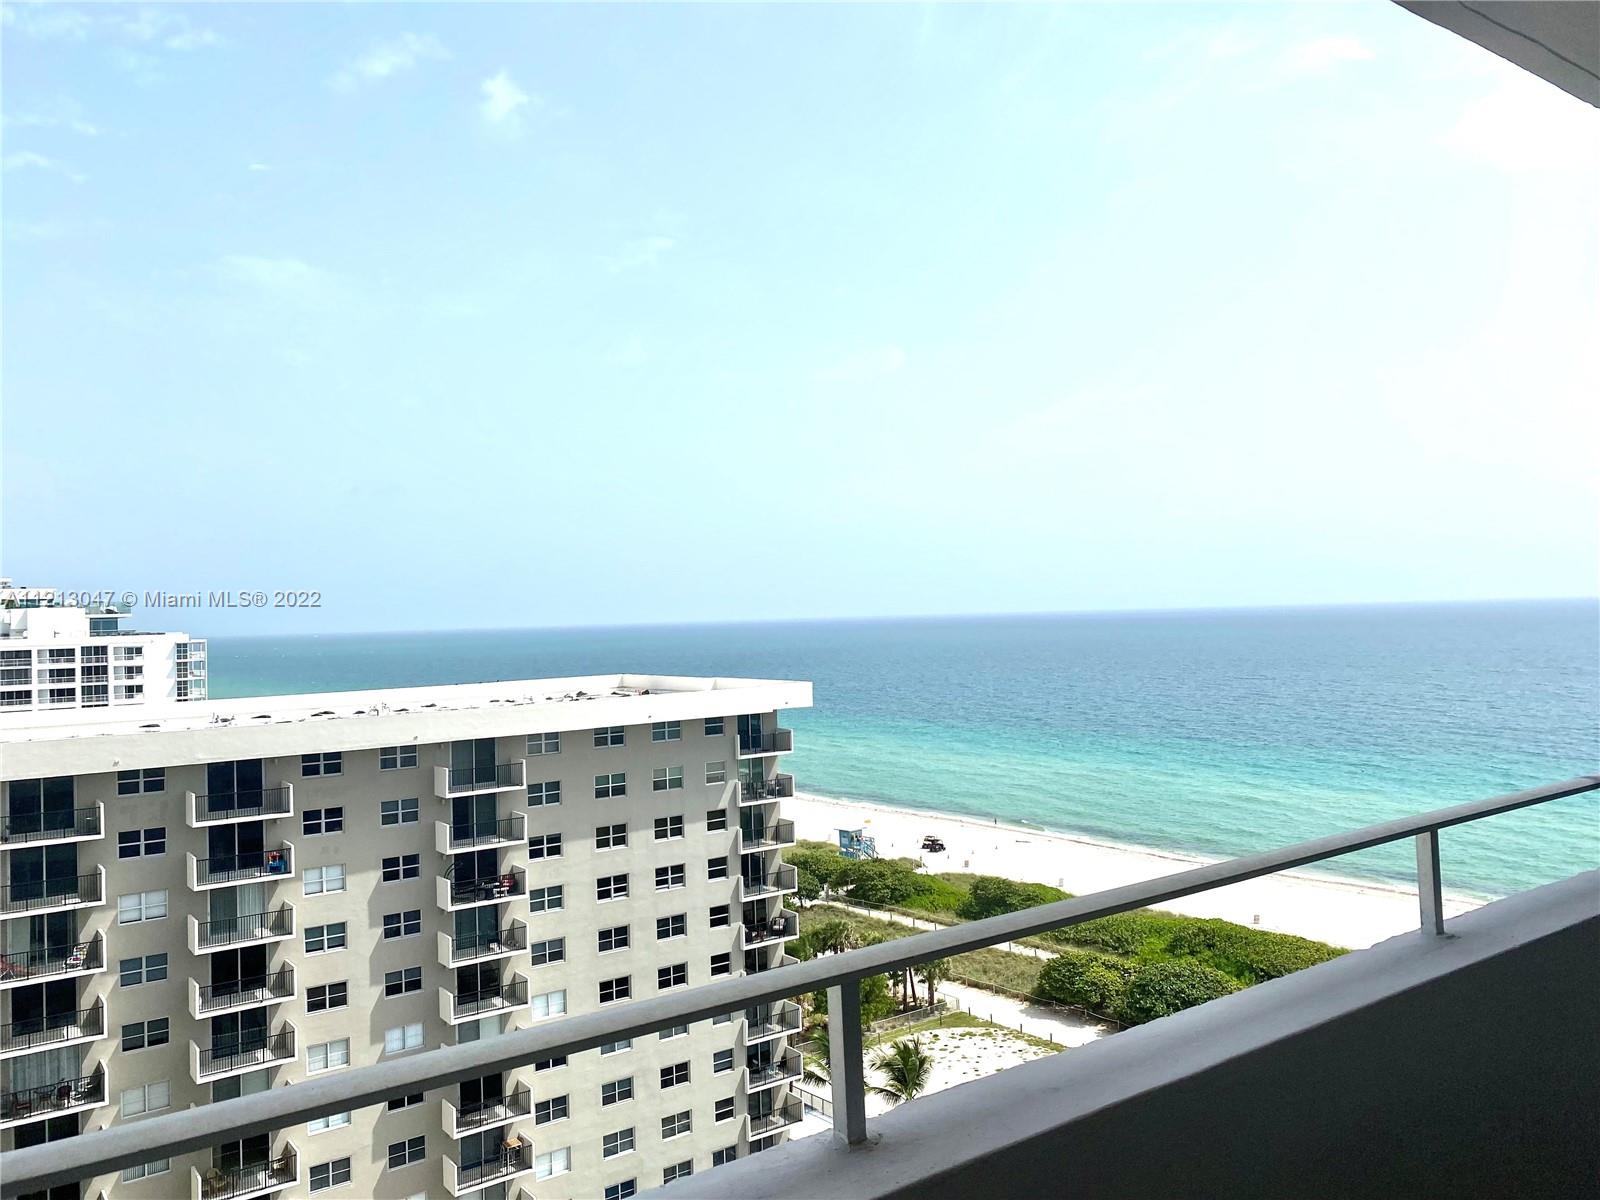 Desirable Ocean Front building in the heart of Surfside.  Bright and spacious 3 bedroom 3 bathroom penthouse unit with stunning direct ocean and city views from wrap around terrace.  Unit is completely remodeled with exquisite finishes.  Building has impact glass windows and doors, pool, 24/7 security, and community room.  Visit the luxurious Shops of Bal Harbour and fabulous restaurants just a short walk away.  A MUST SEE!